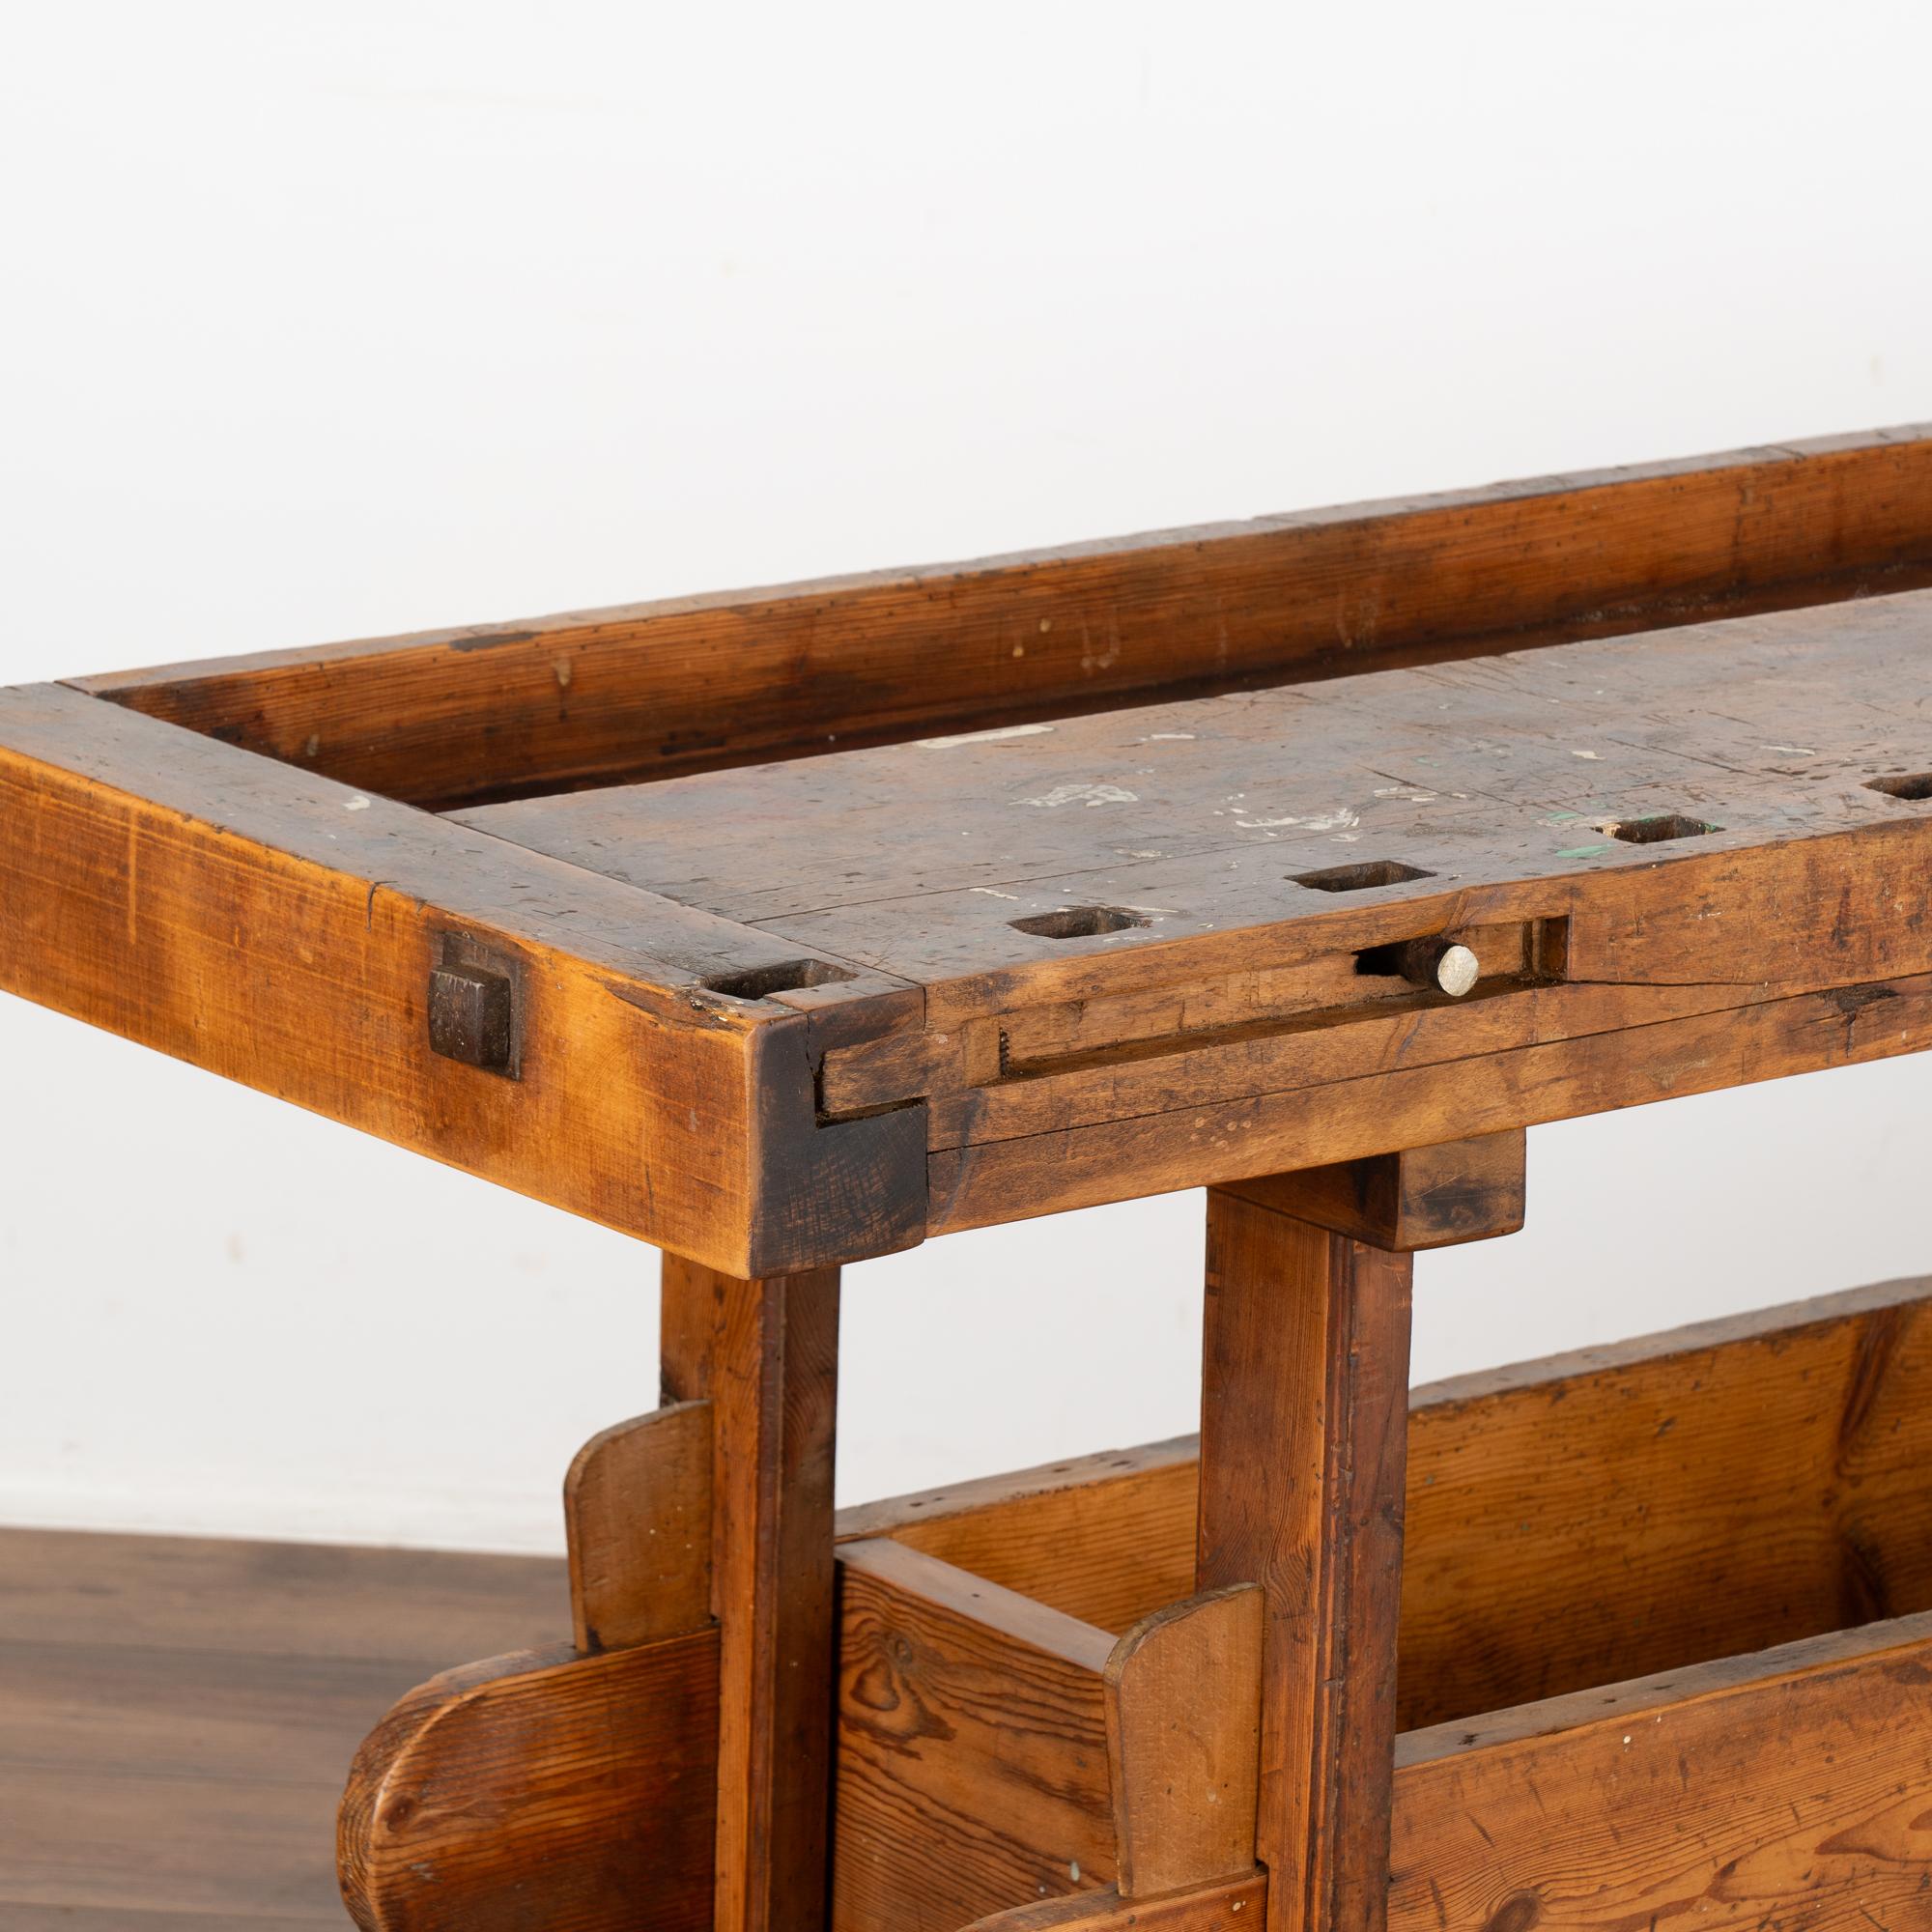 Wood Rustic Carpenter's Workbench Console Table With Shelf, Denmark circa 1890